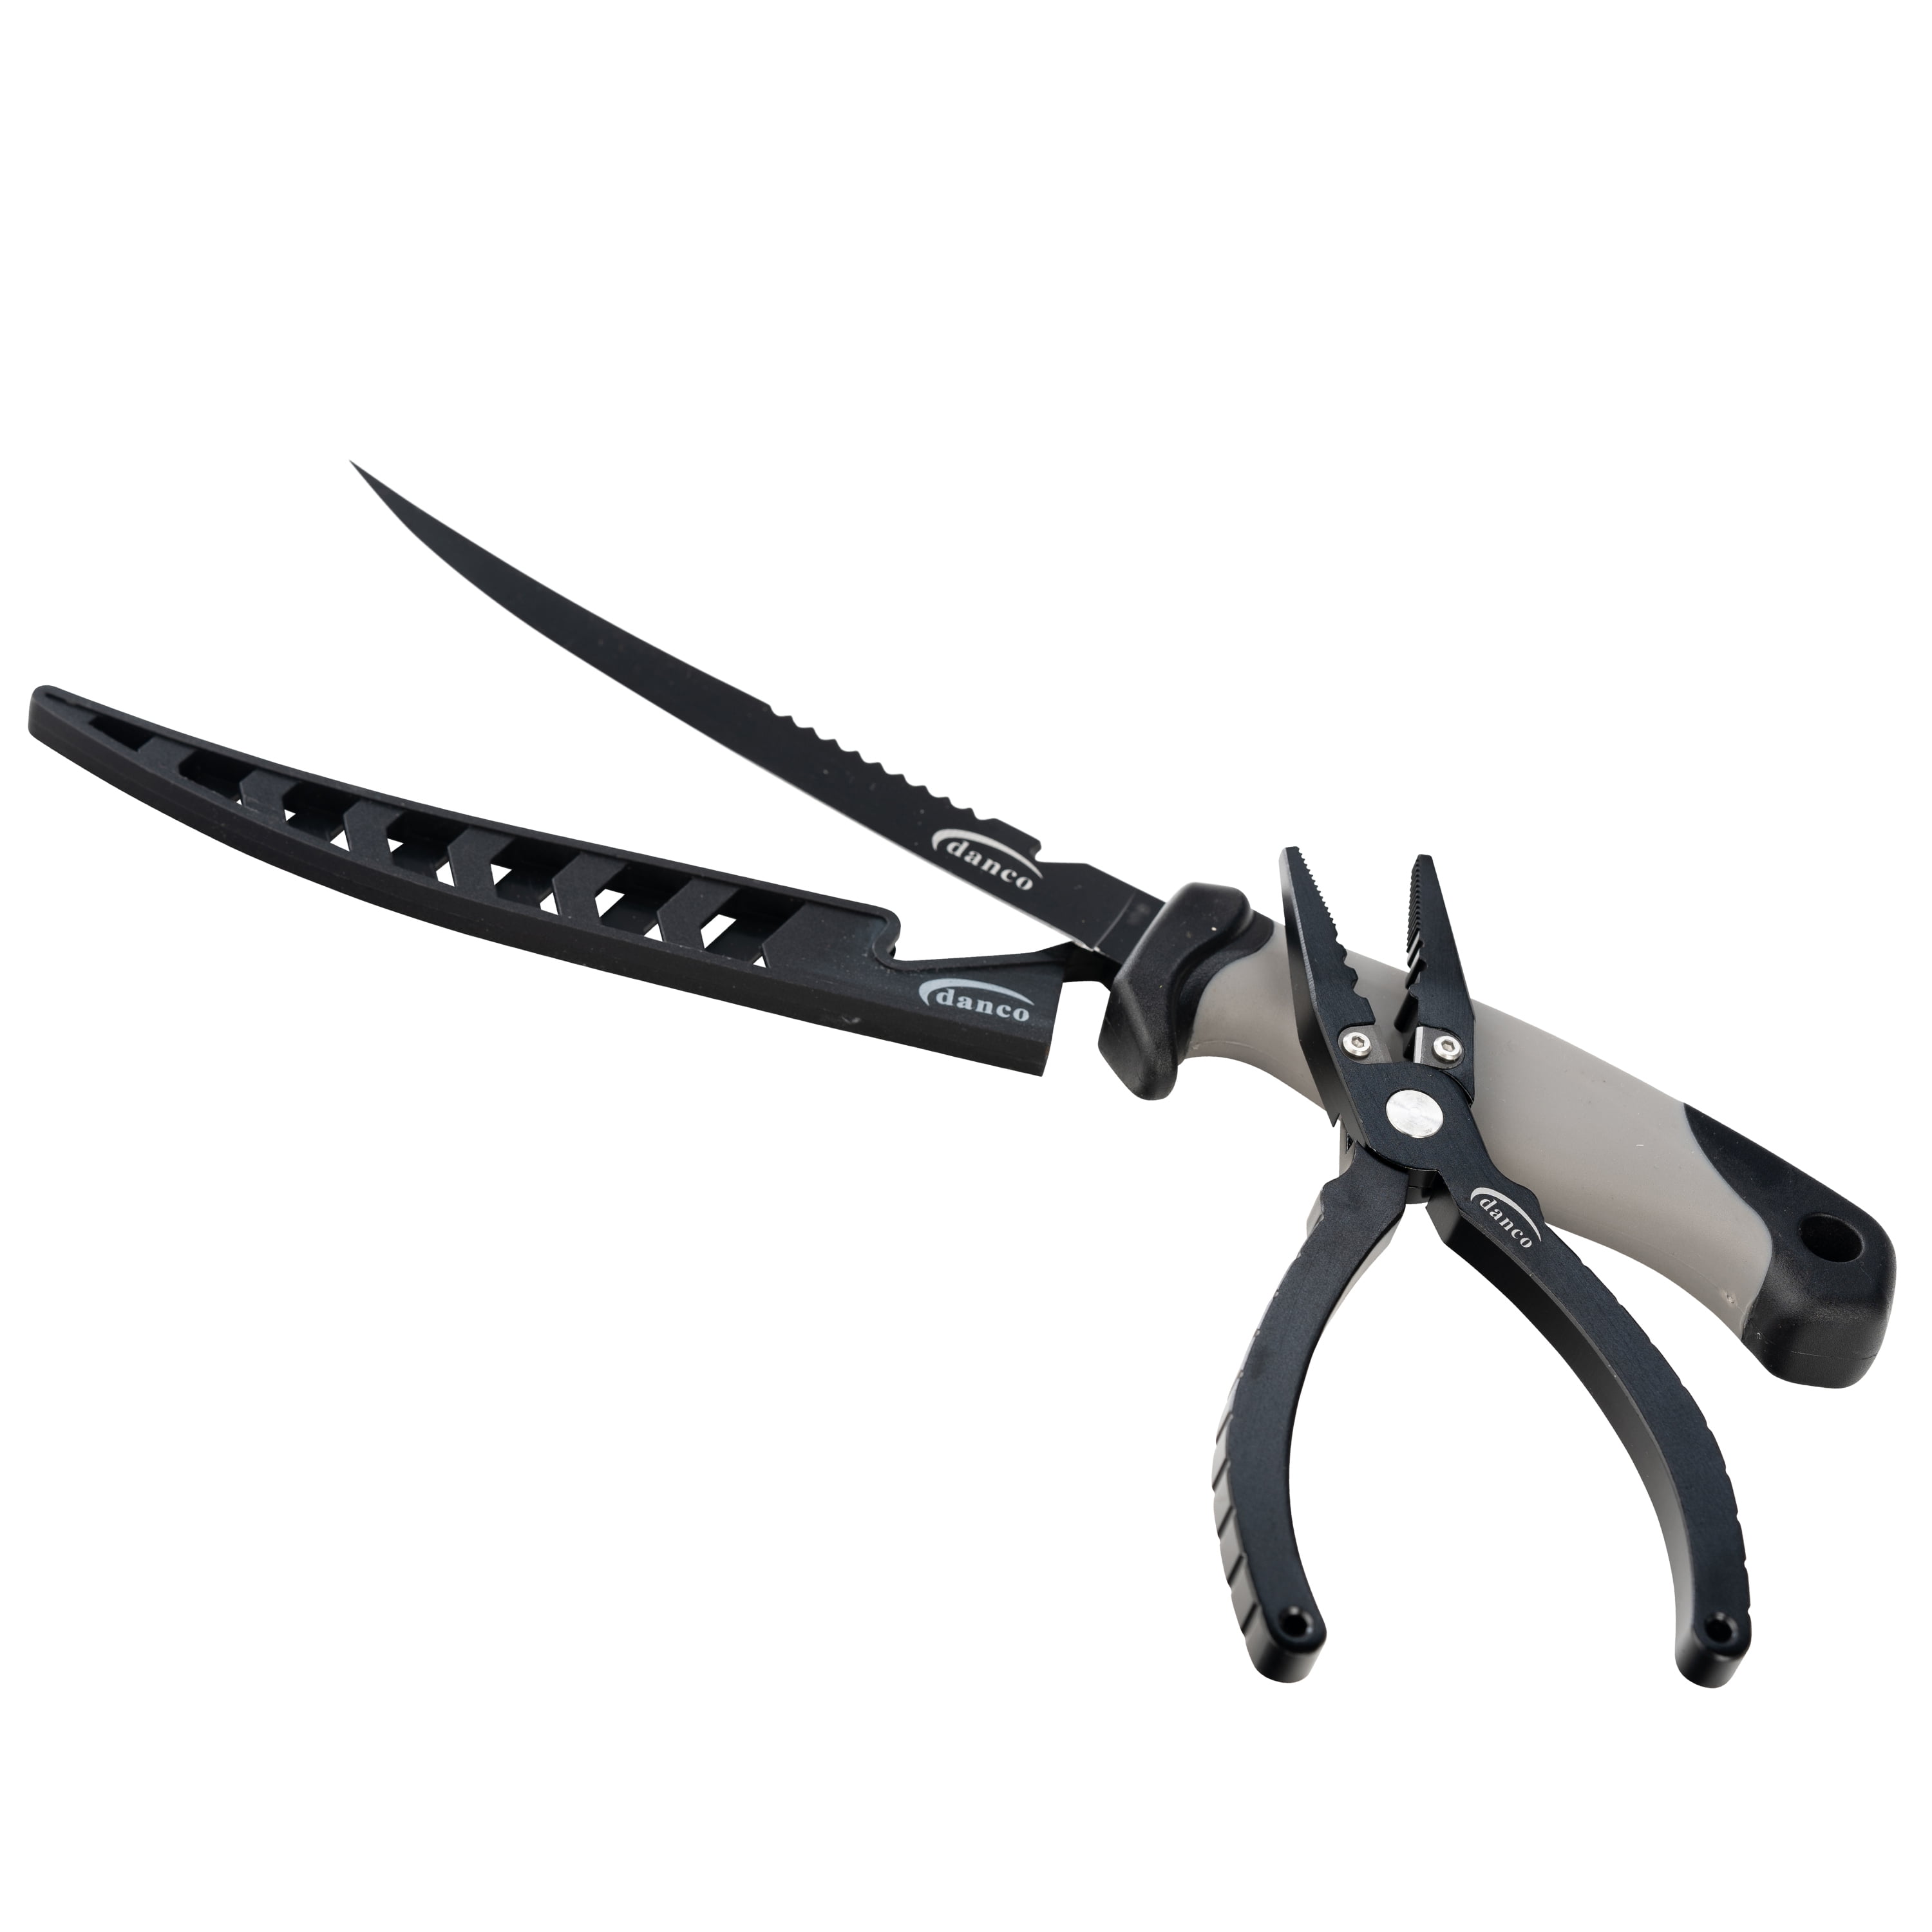 Danco Sports 6.5 Aluminum Plier & 7 PTFE Coated Fillet Knife with Sheath Combo Pack - Each